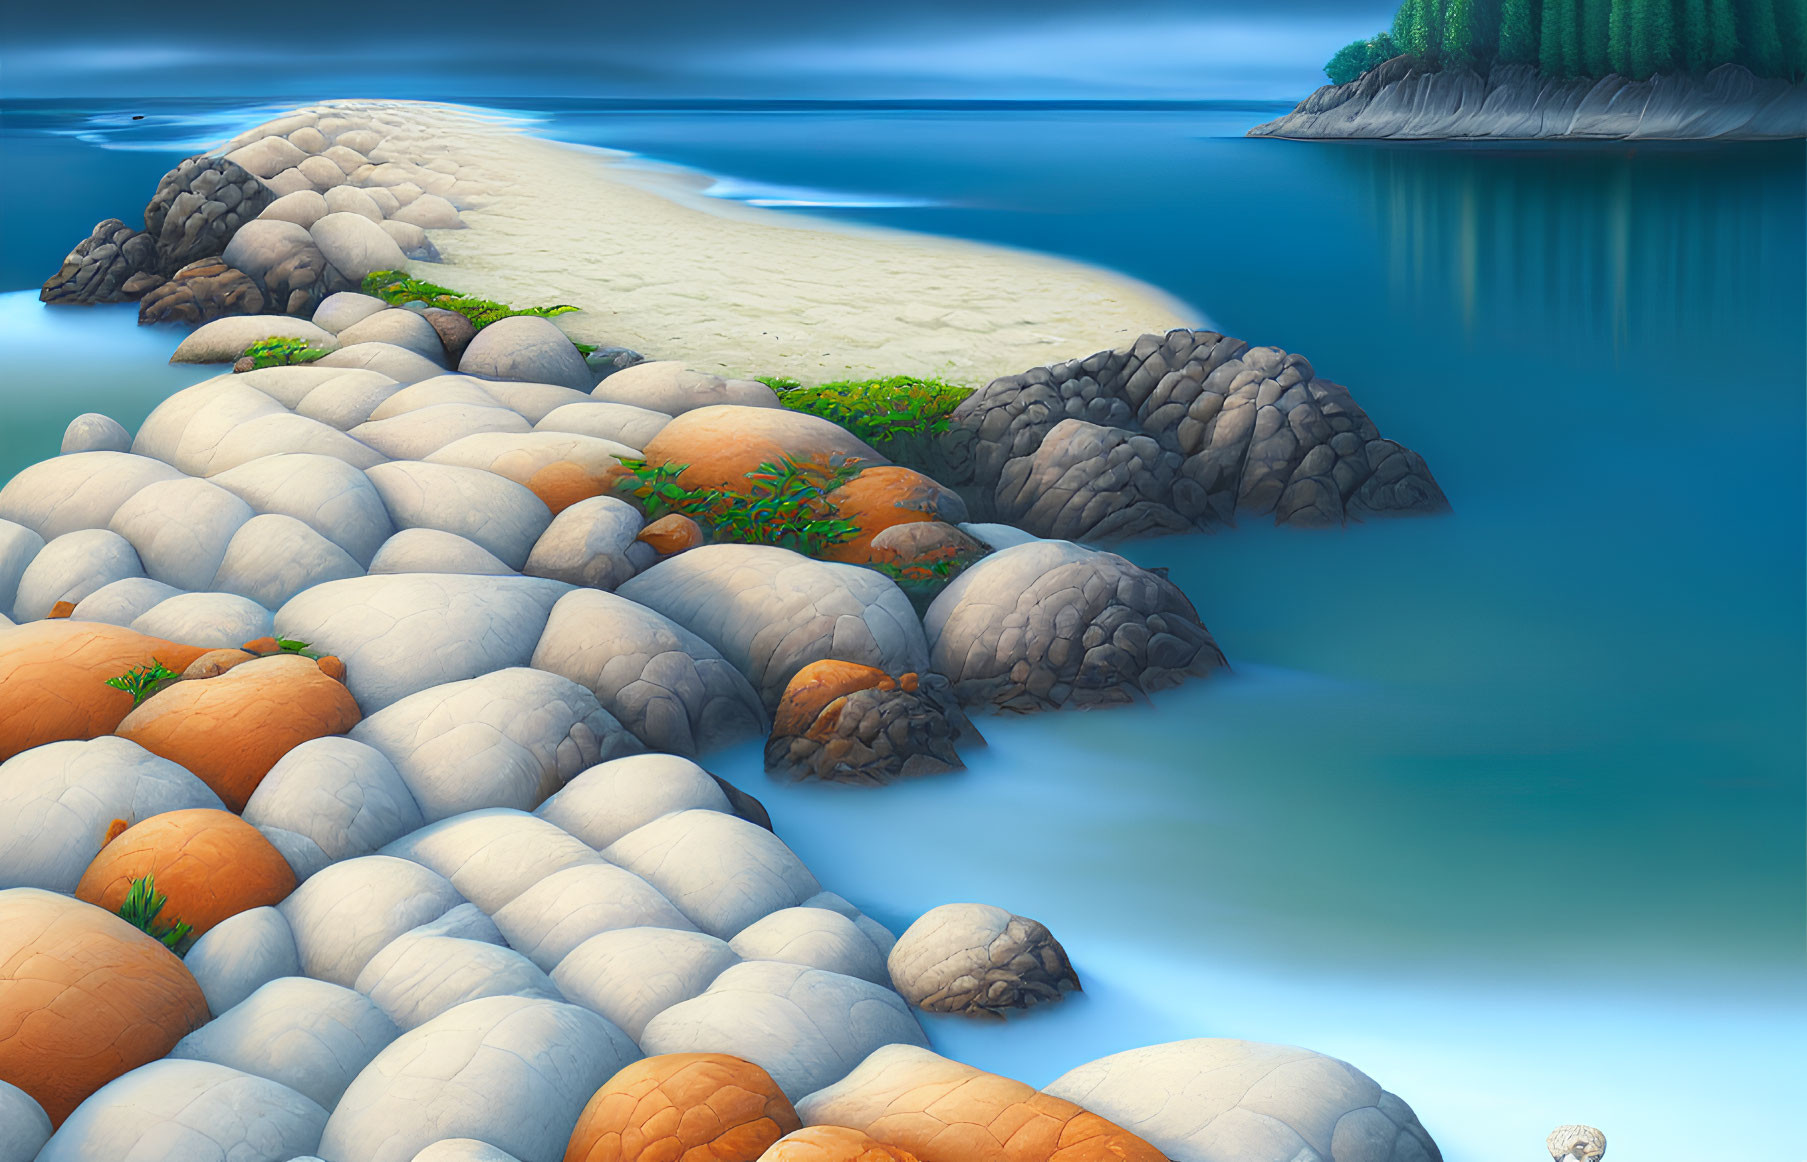 Realistic beach scene with colorful stones, greenery, and tranquil waters